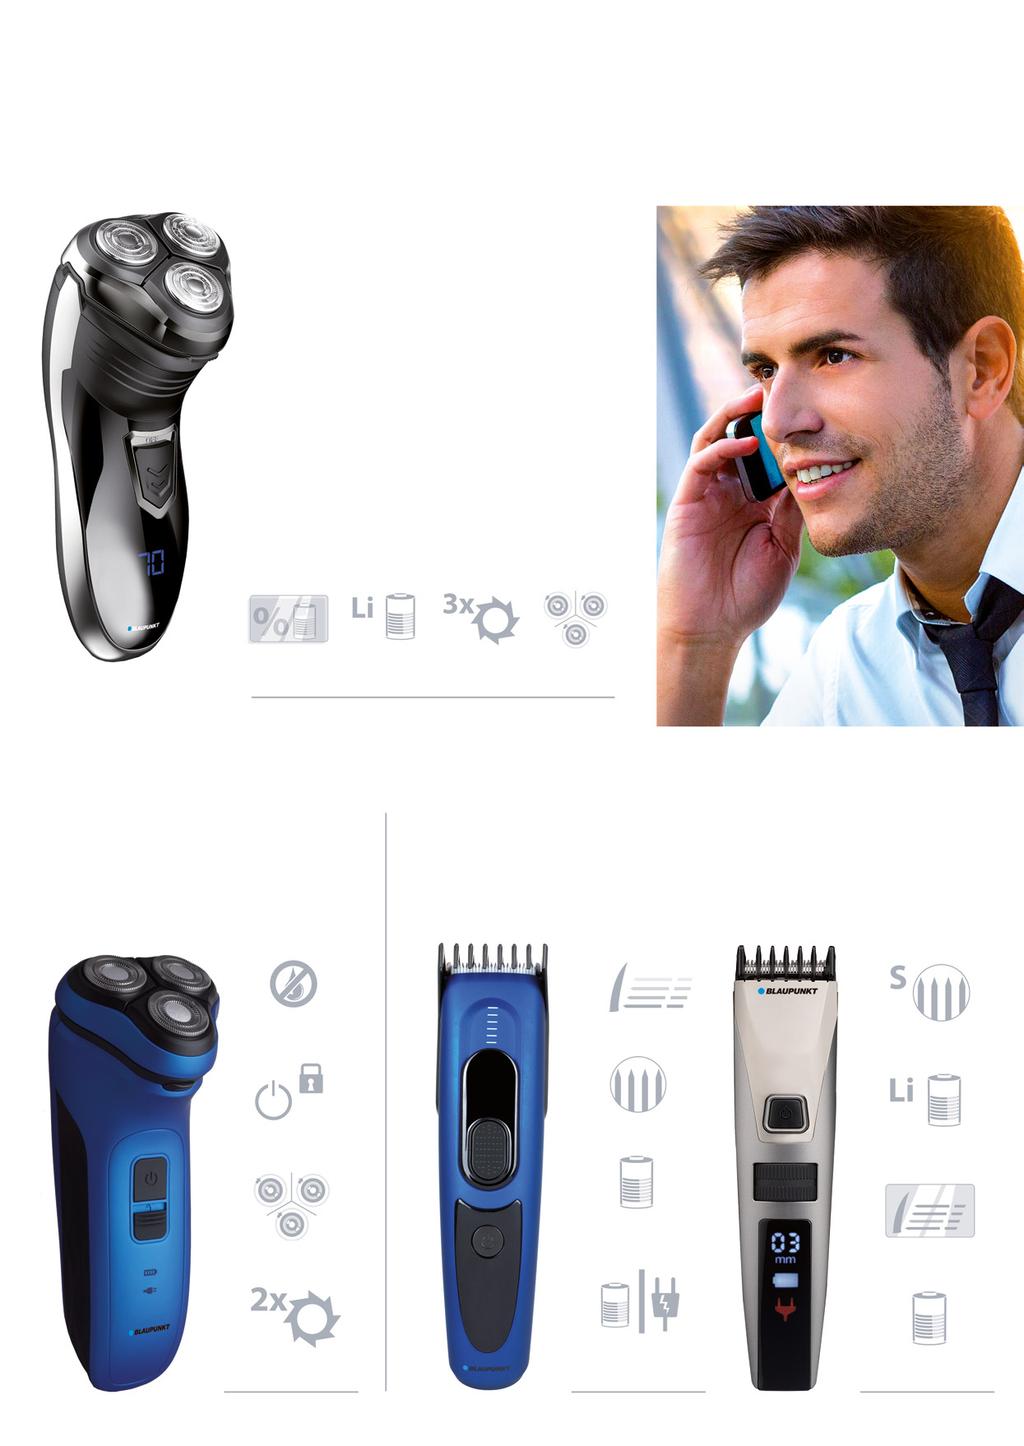 Electric shaver MSR701 Every man knows how important a good razor is in daily care. With a high quality device the morning shaving ceases to be a chore and instead becomes a pleasure.